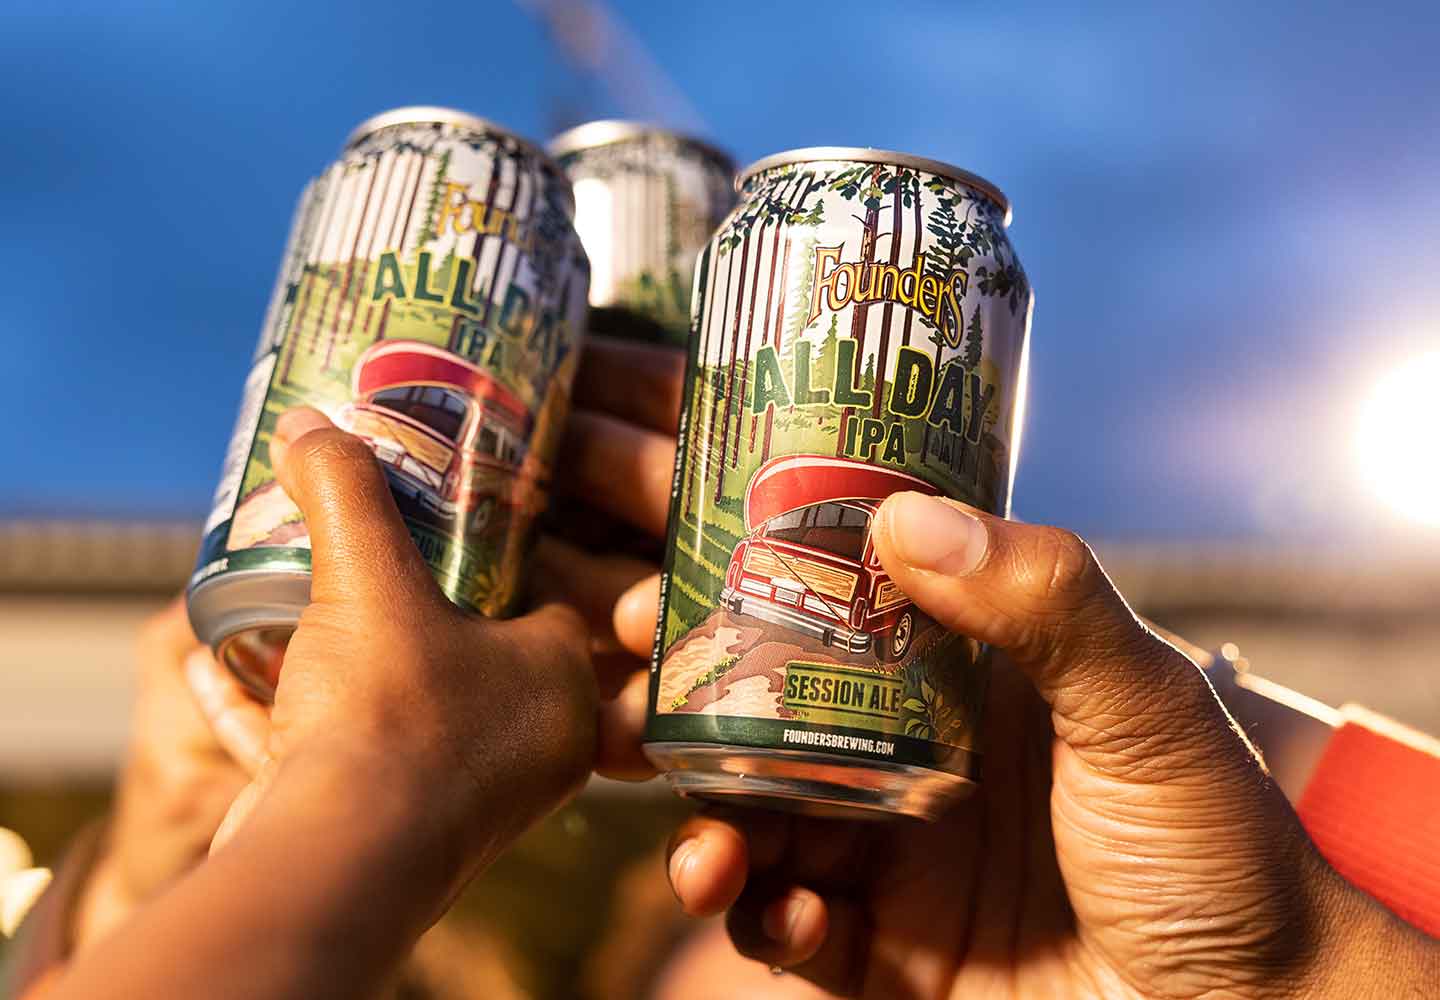 Cans of All Day IPA being raised together by hands